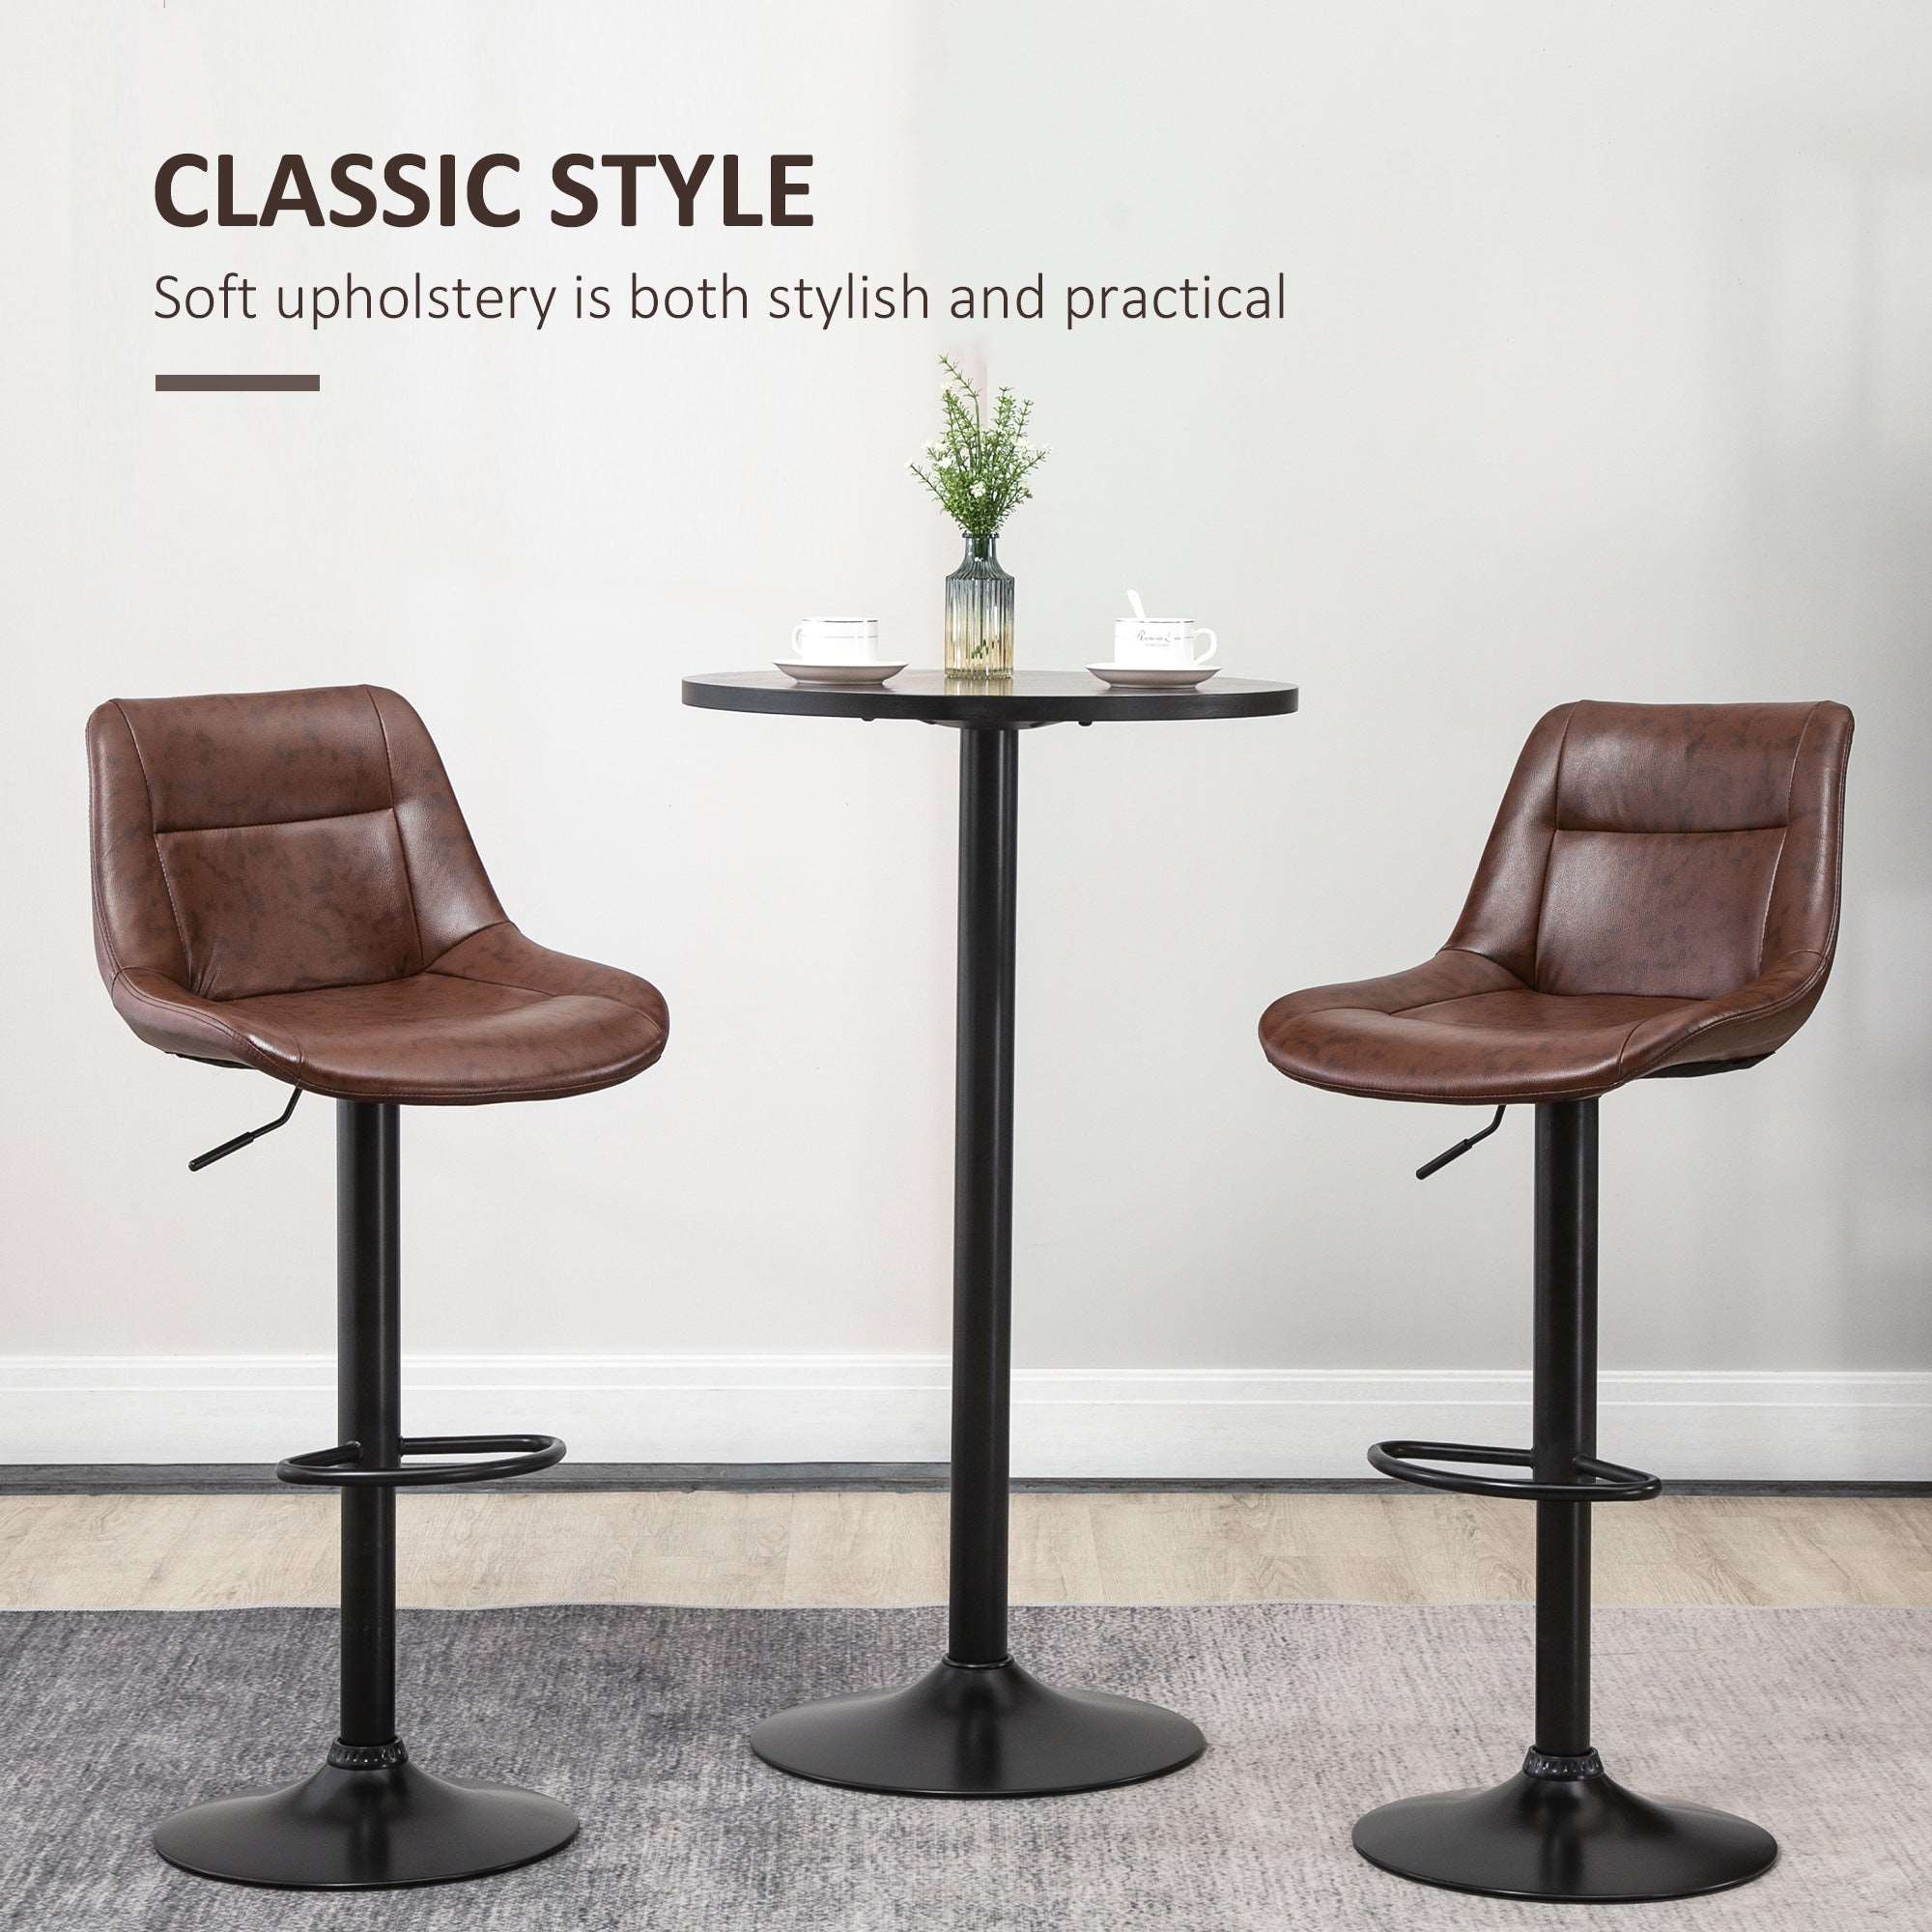 Adjustable Bar Stools Set of 2, Modern Kitchen Stools, 360 Degree Swivel Bar Height Barstools in PU Leather with Footrest, Brown  AOSOM   